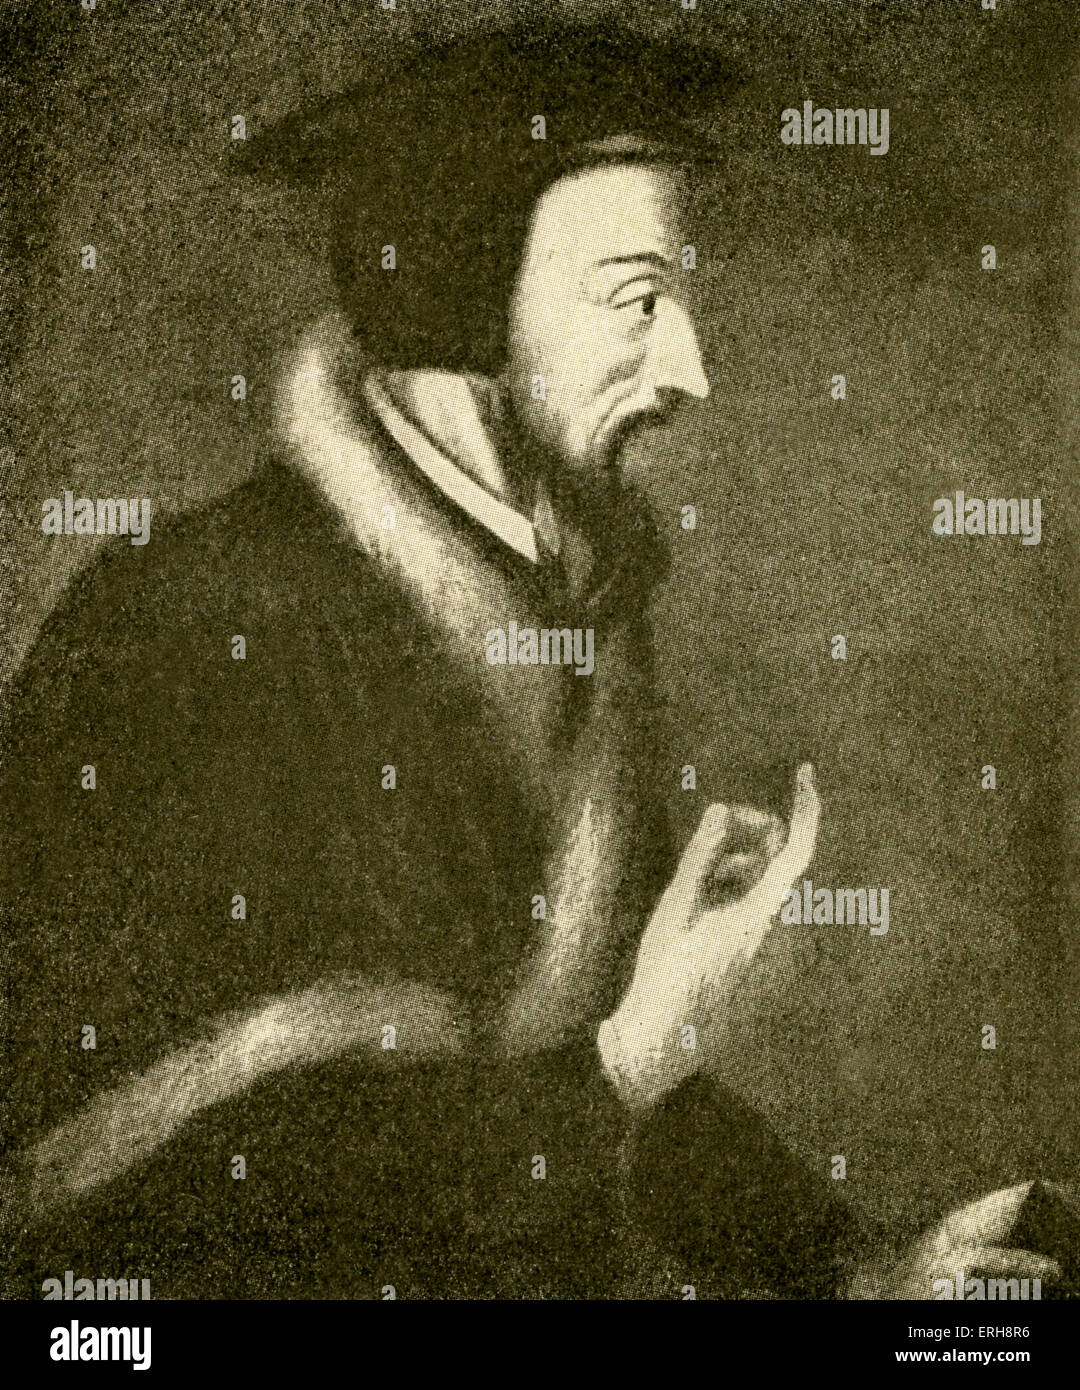 John Calvin - portrait after painting by unknown artist. Influential French theologian and pastor during the Protestant Stock Photo